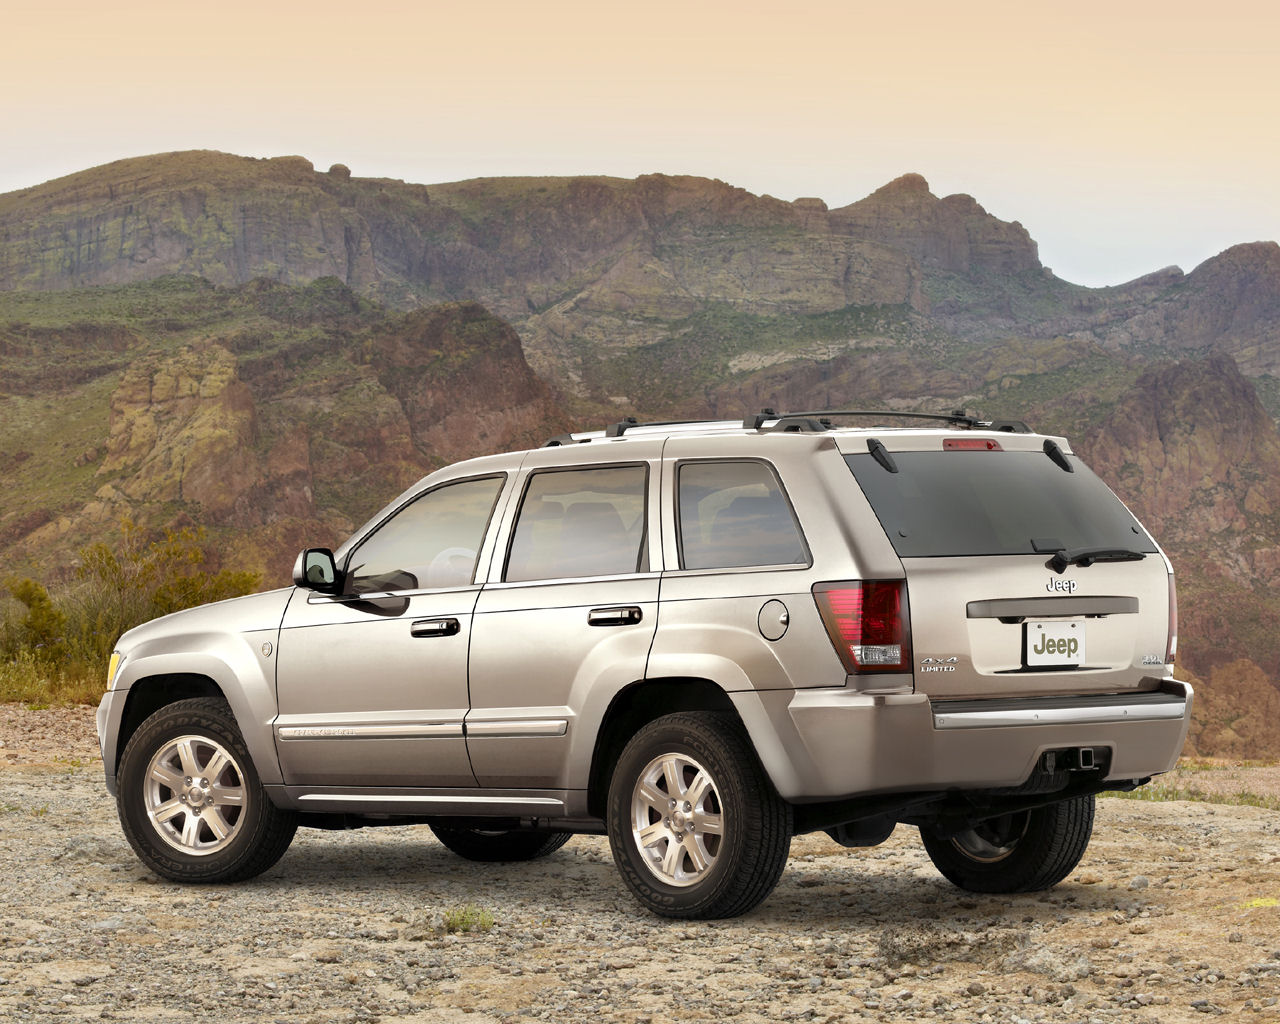 Jeep Grand Cherokee S Limited Image Picture Wallpaper